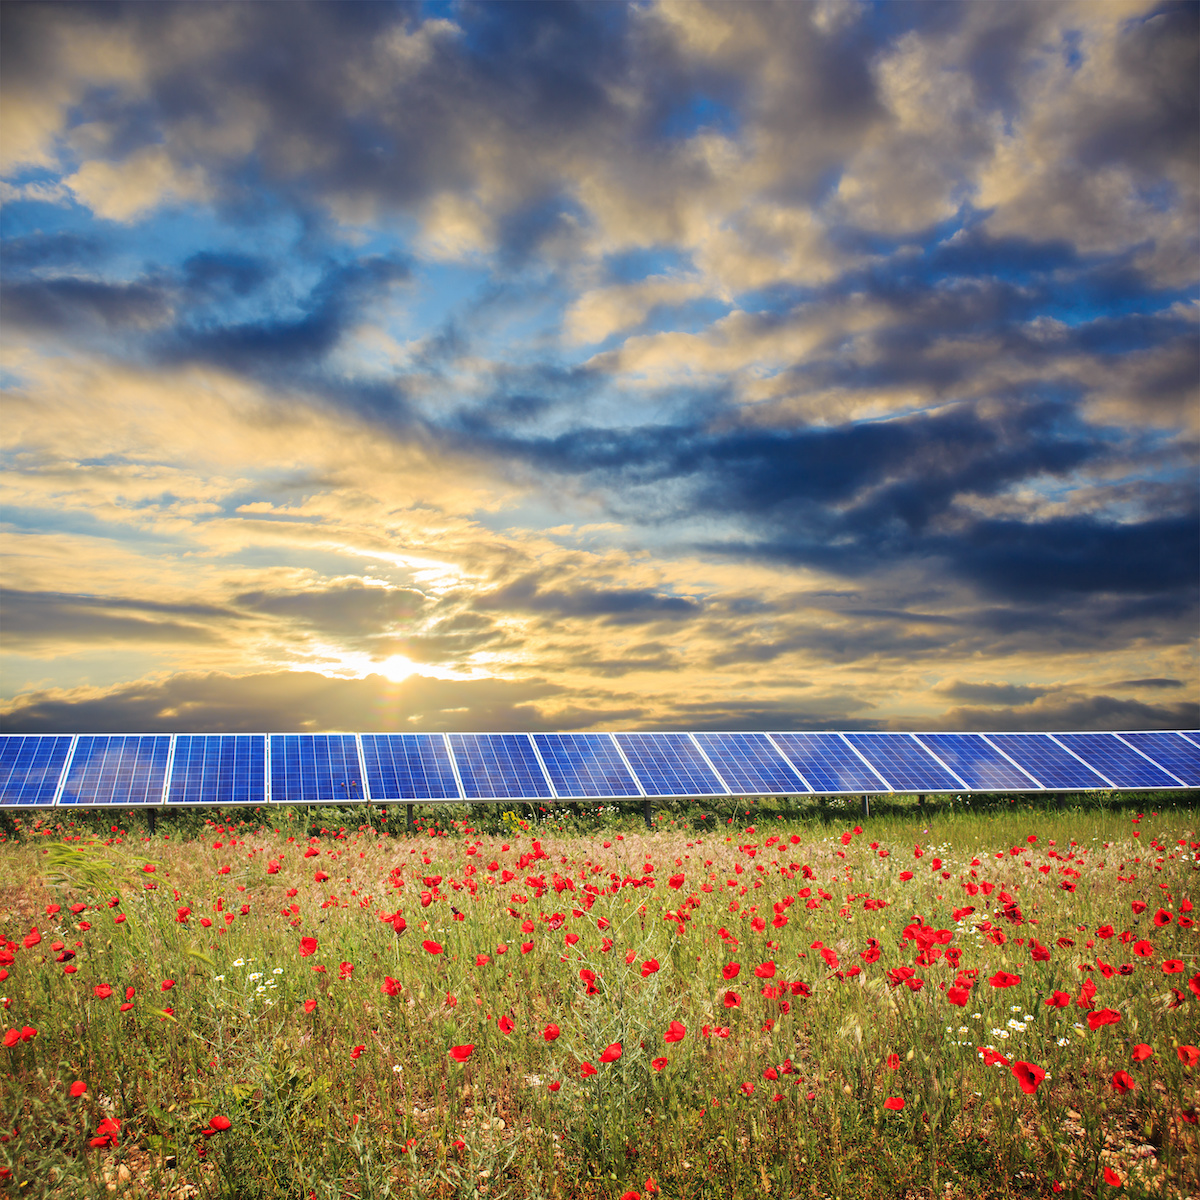 solar panels in field with flowers